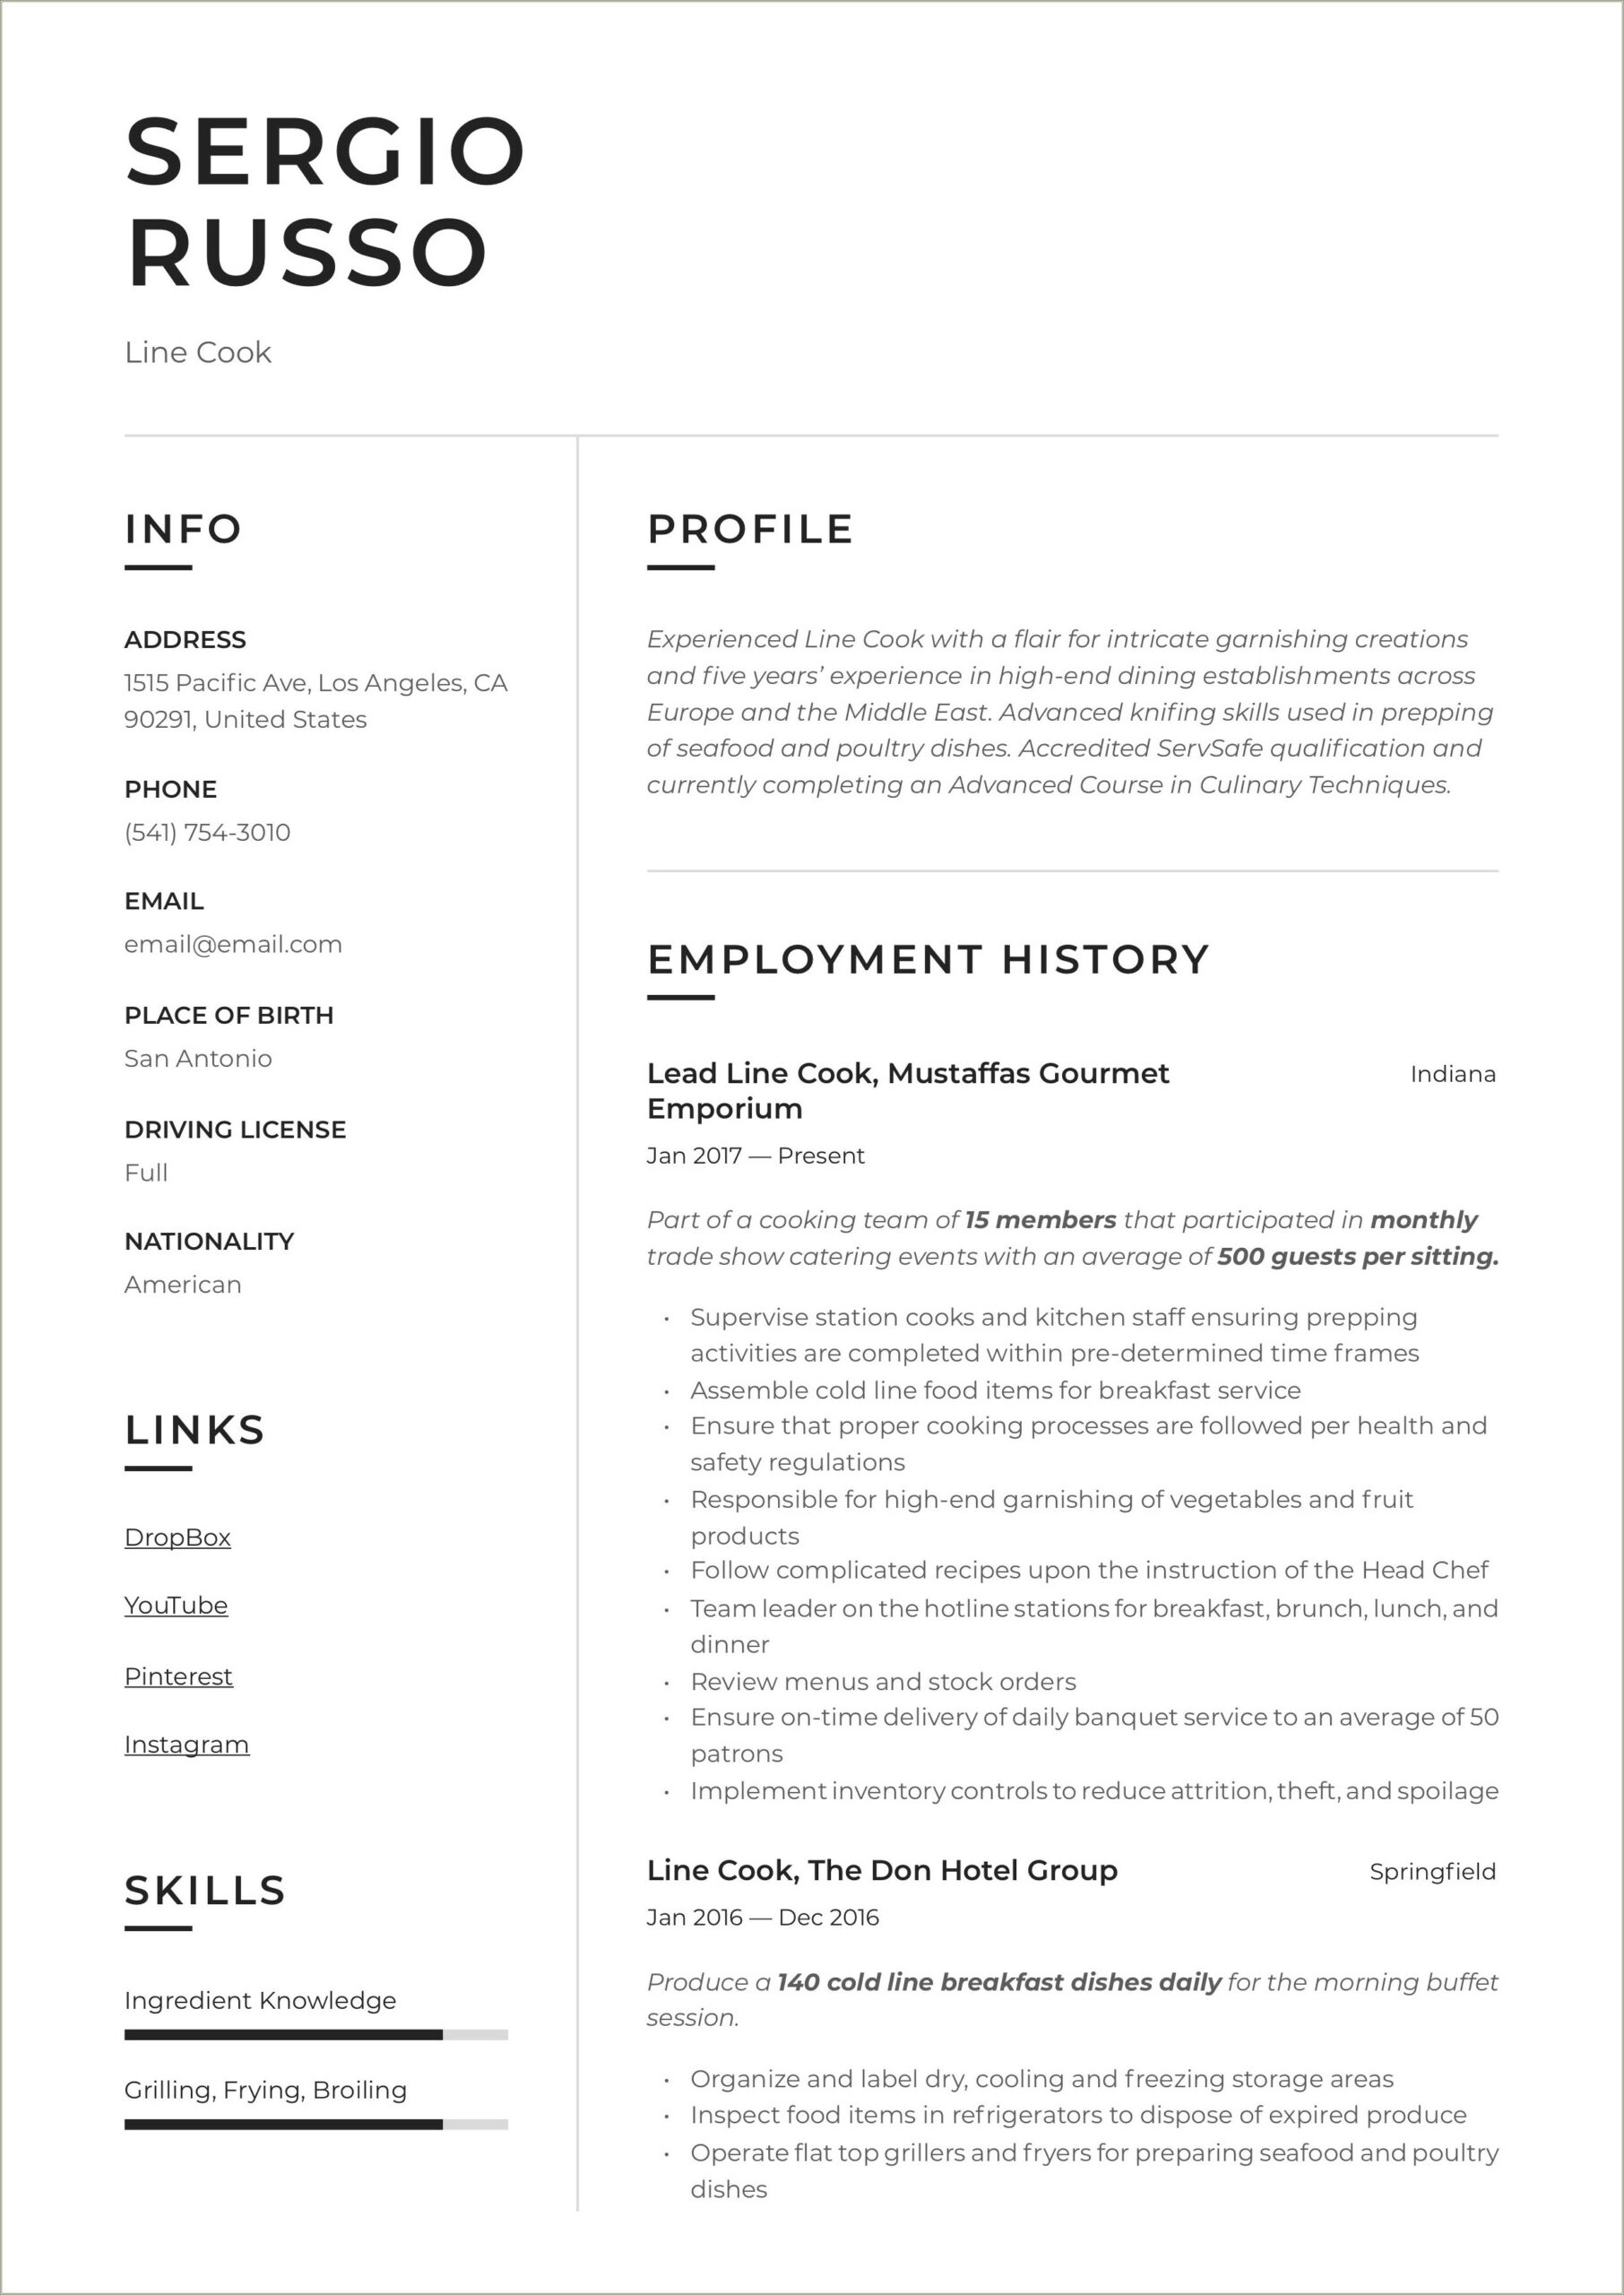 Resume Wording For Line Cook And Manager